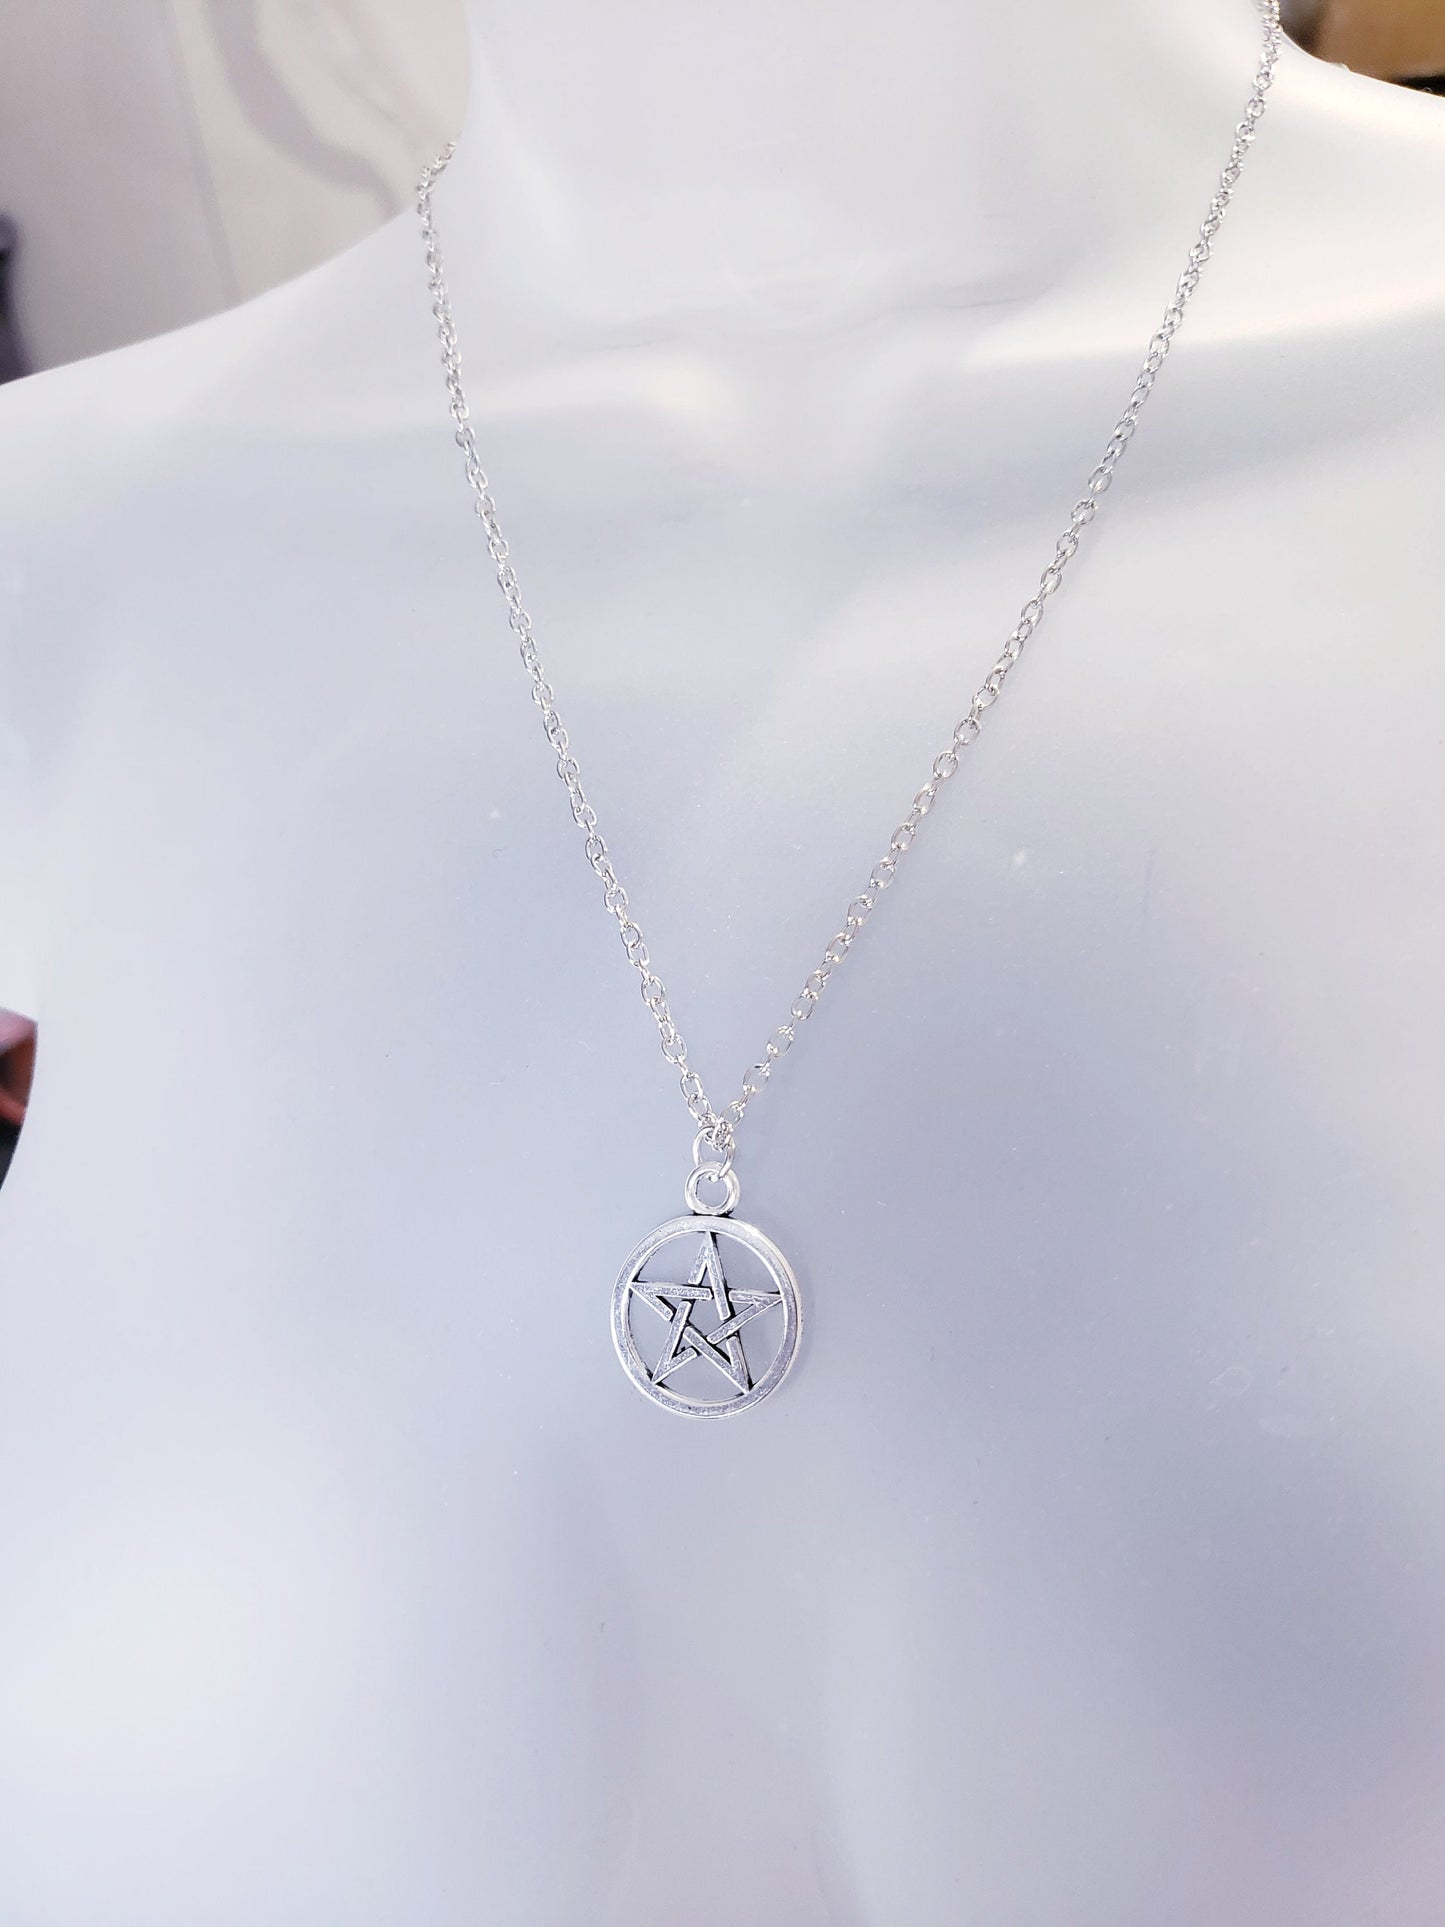 Pentagram necklace Ancient silver 16in chain Wiccan Pagan witchy charm